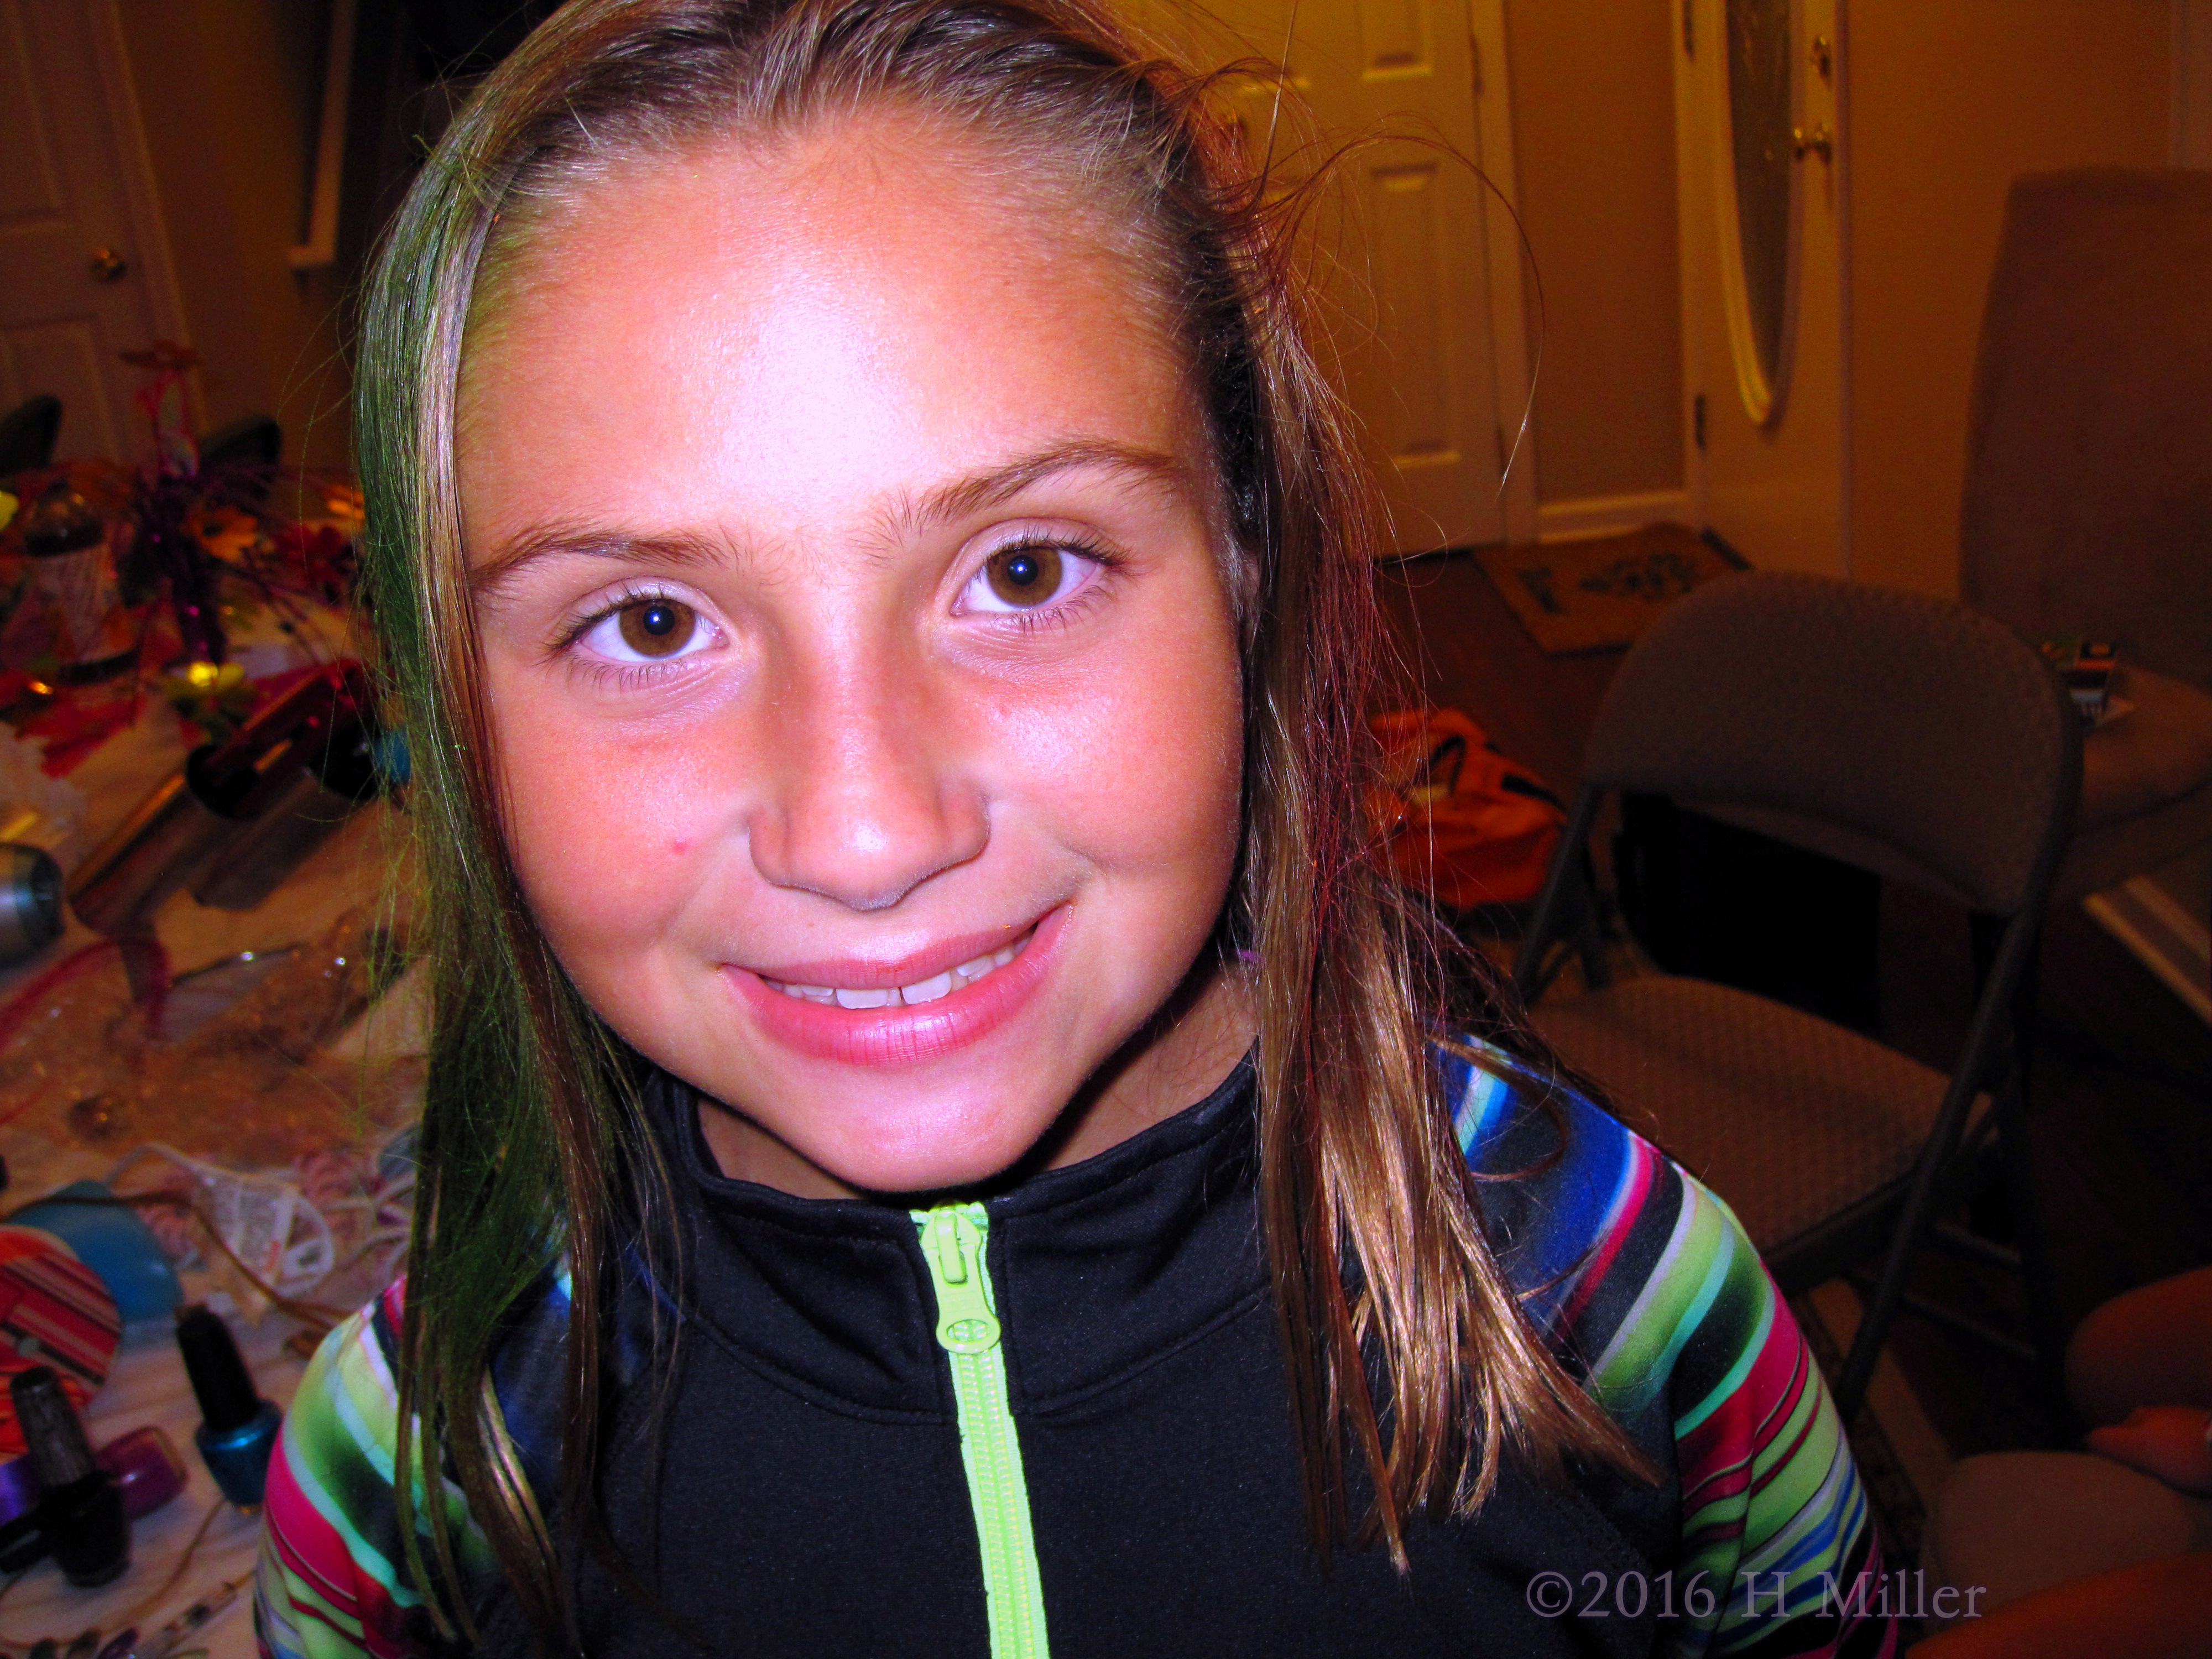 She Looks Happy With Her Green Temporary Hair Dye 